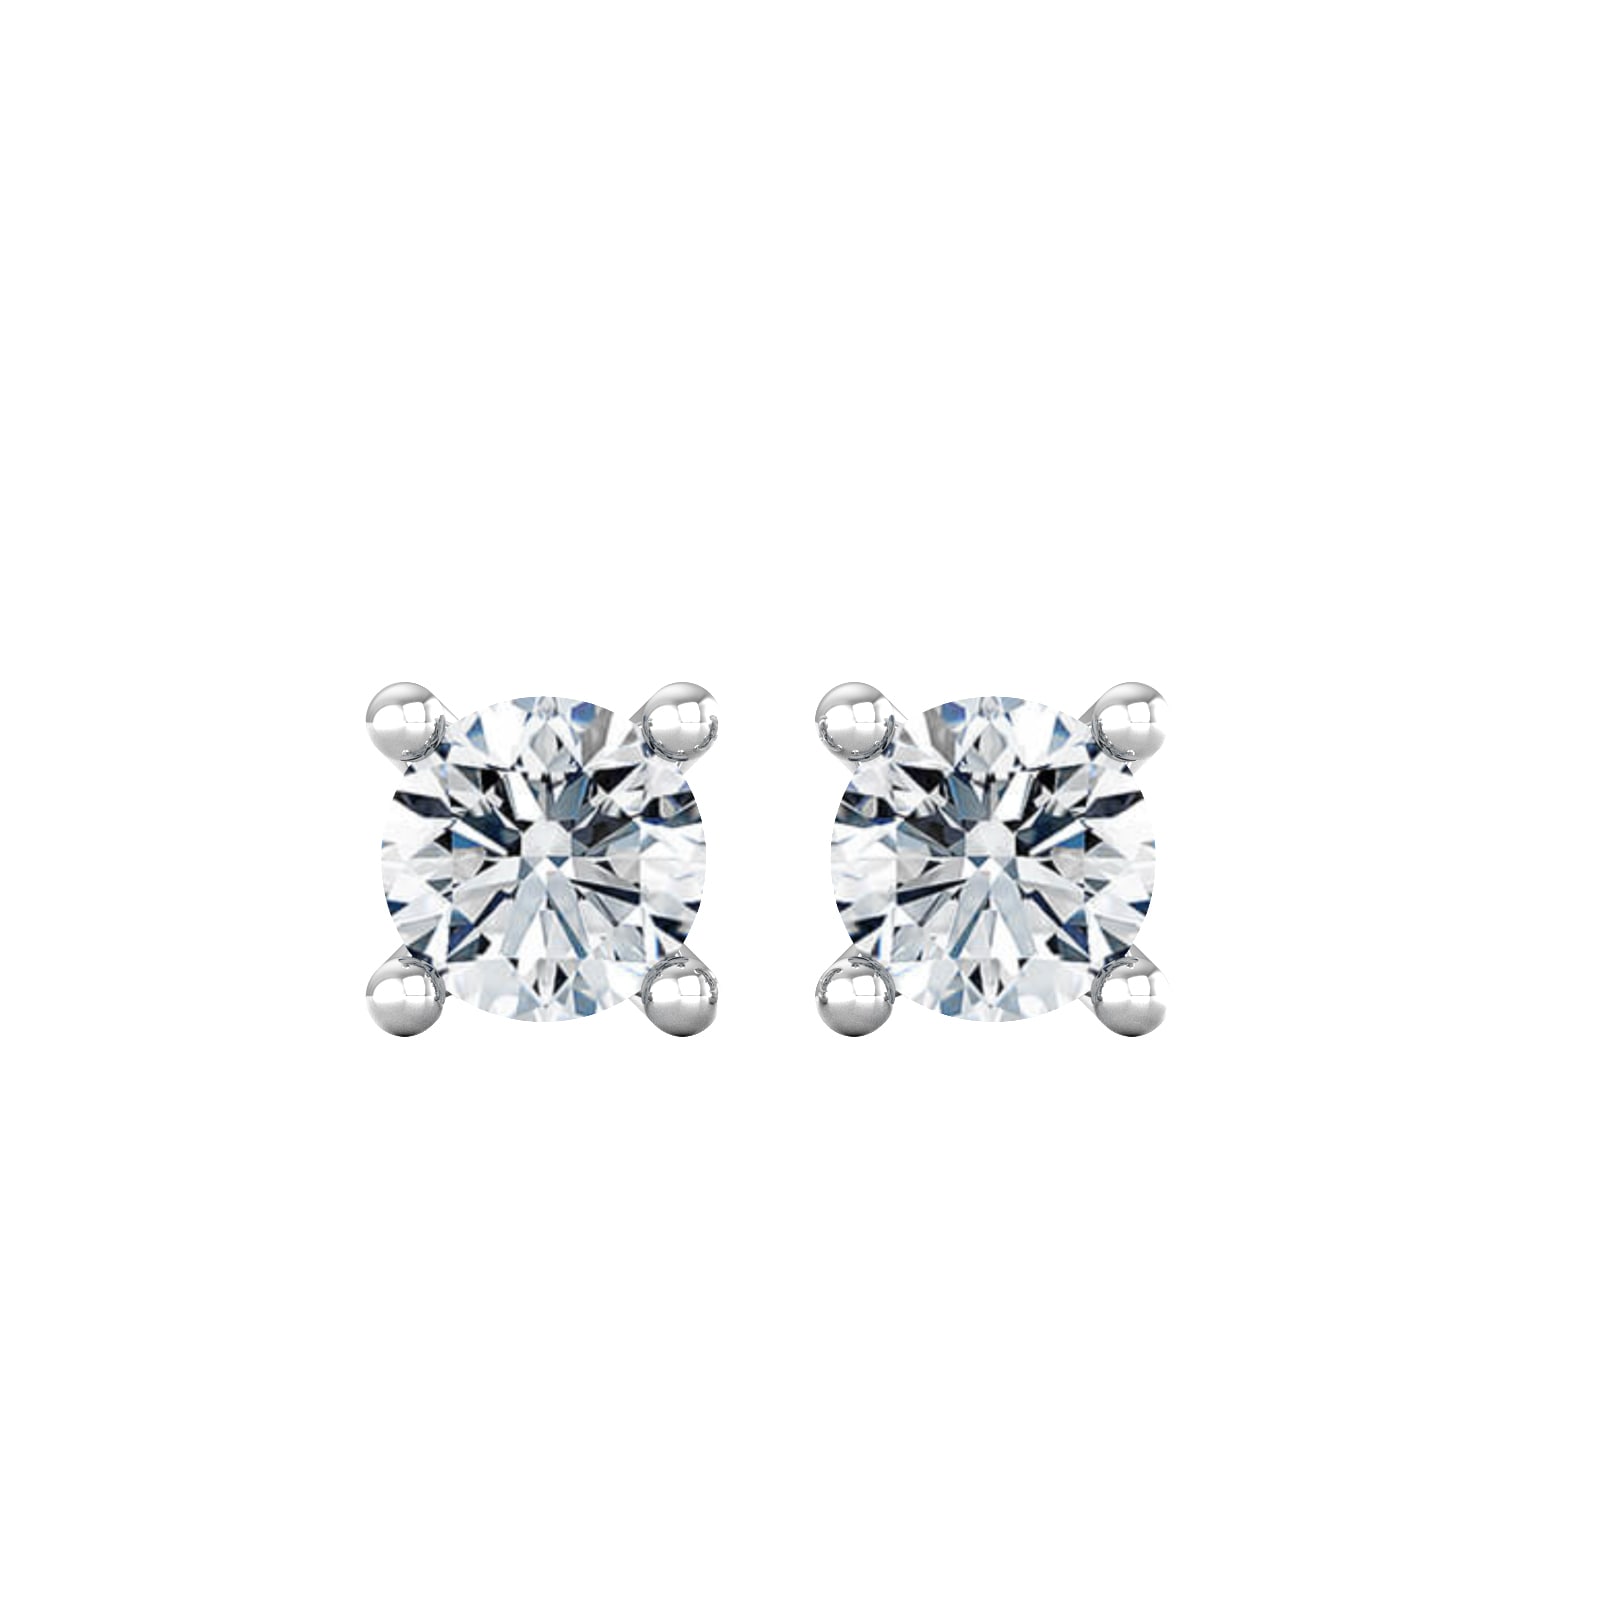 9ct White Gold 0.40cttw Solitaire Diamond Stud Earrings